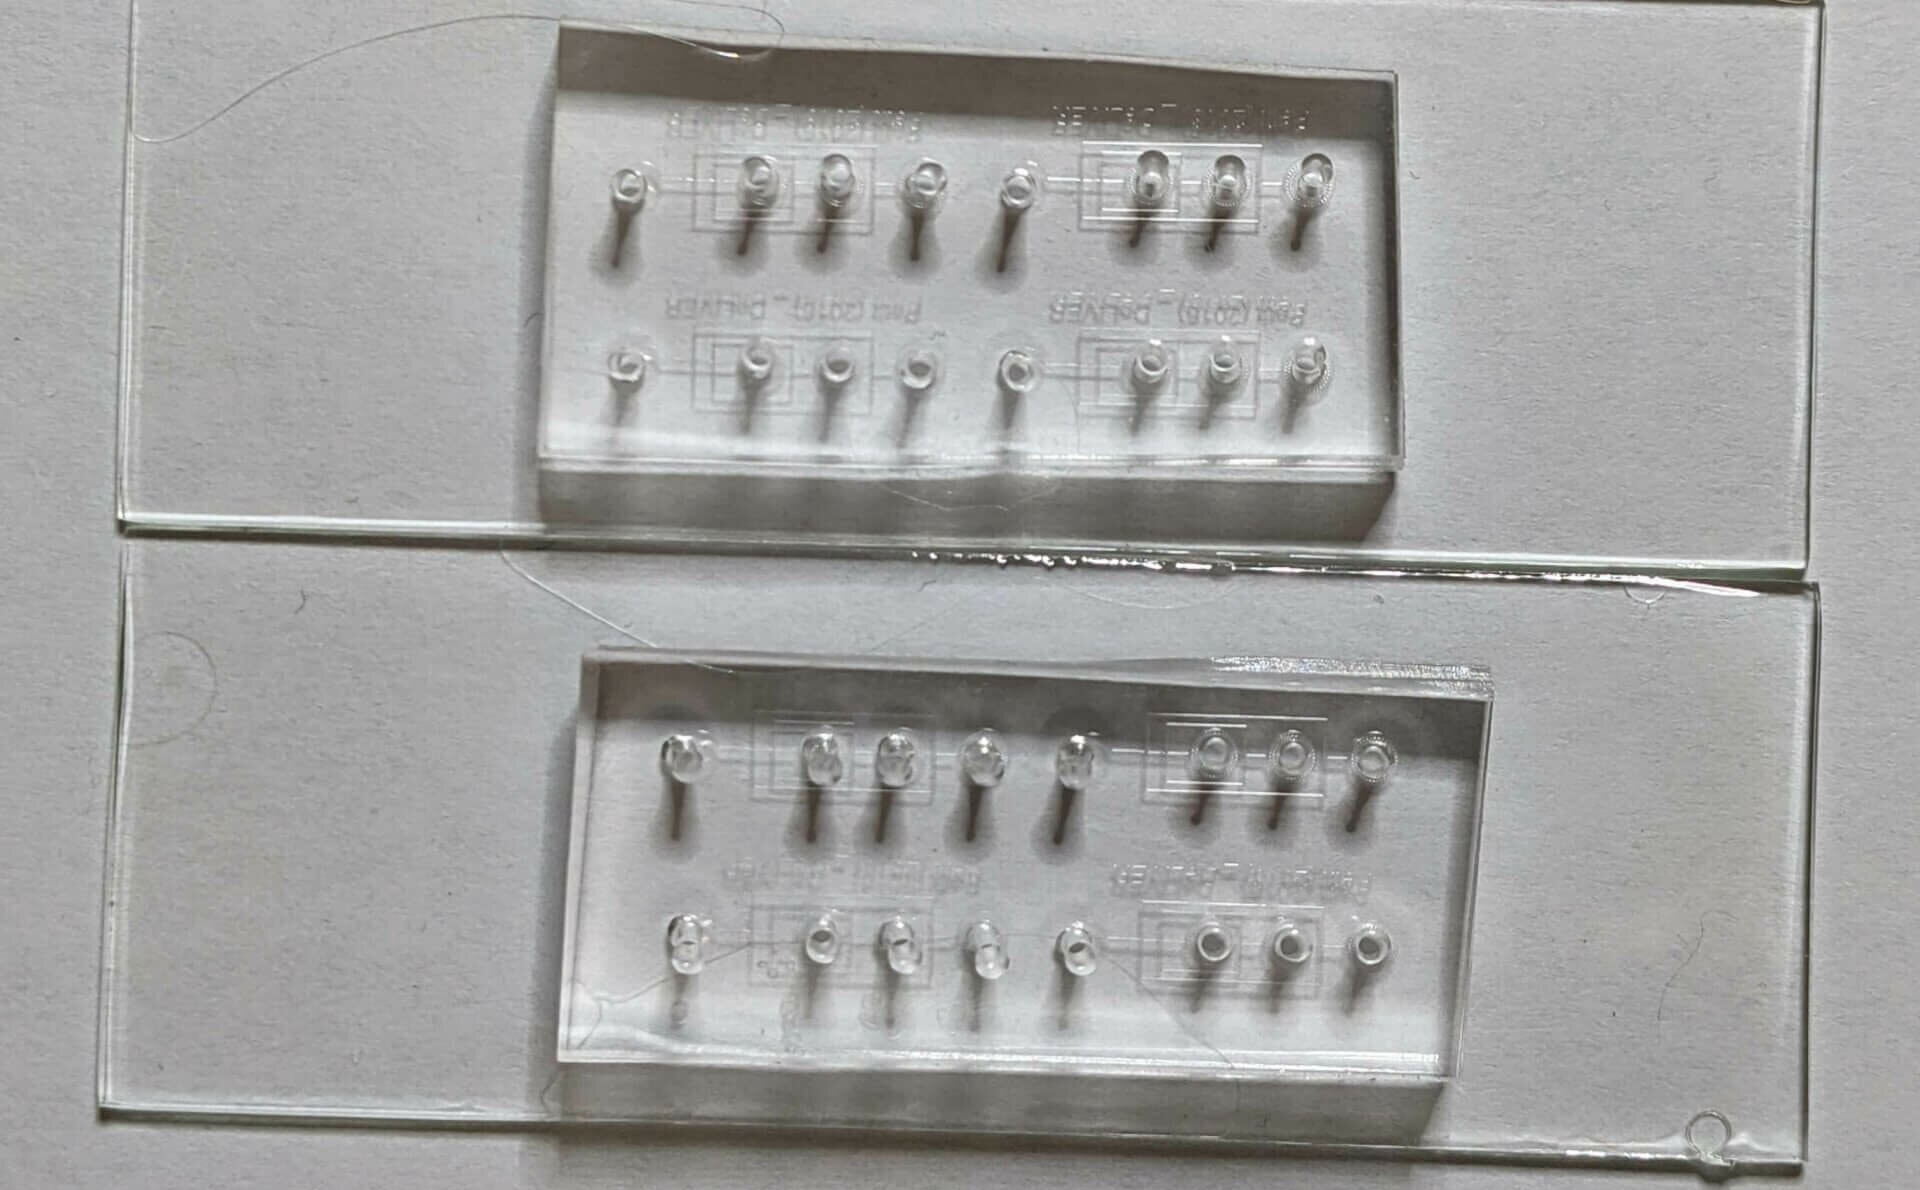 Homemade microfluidic chip for double emulsion